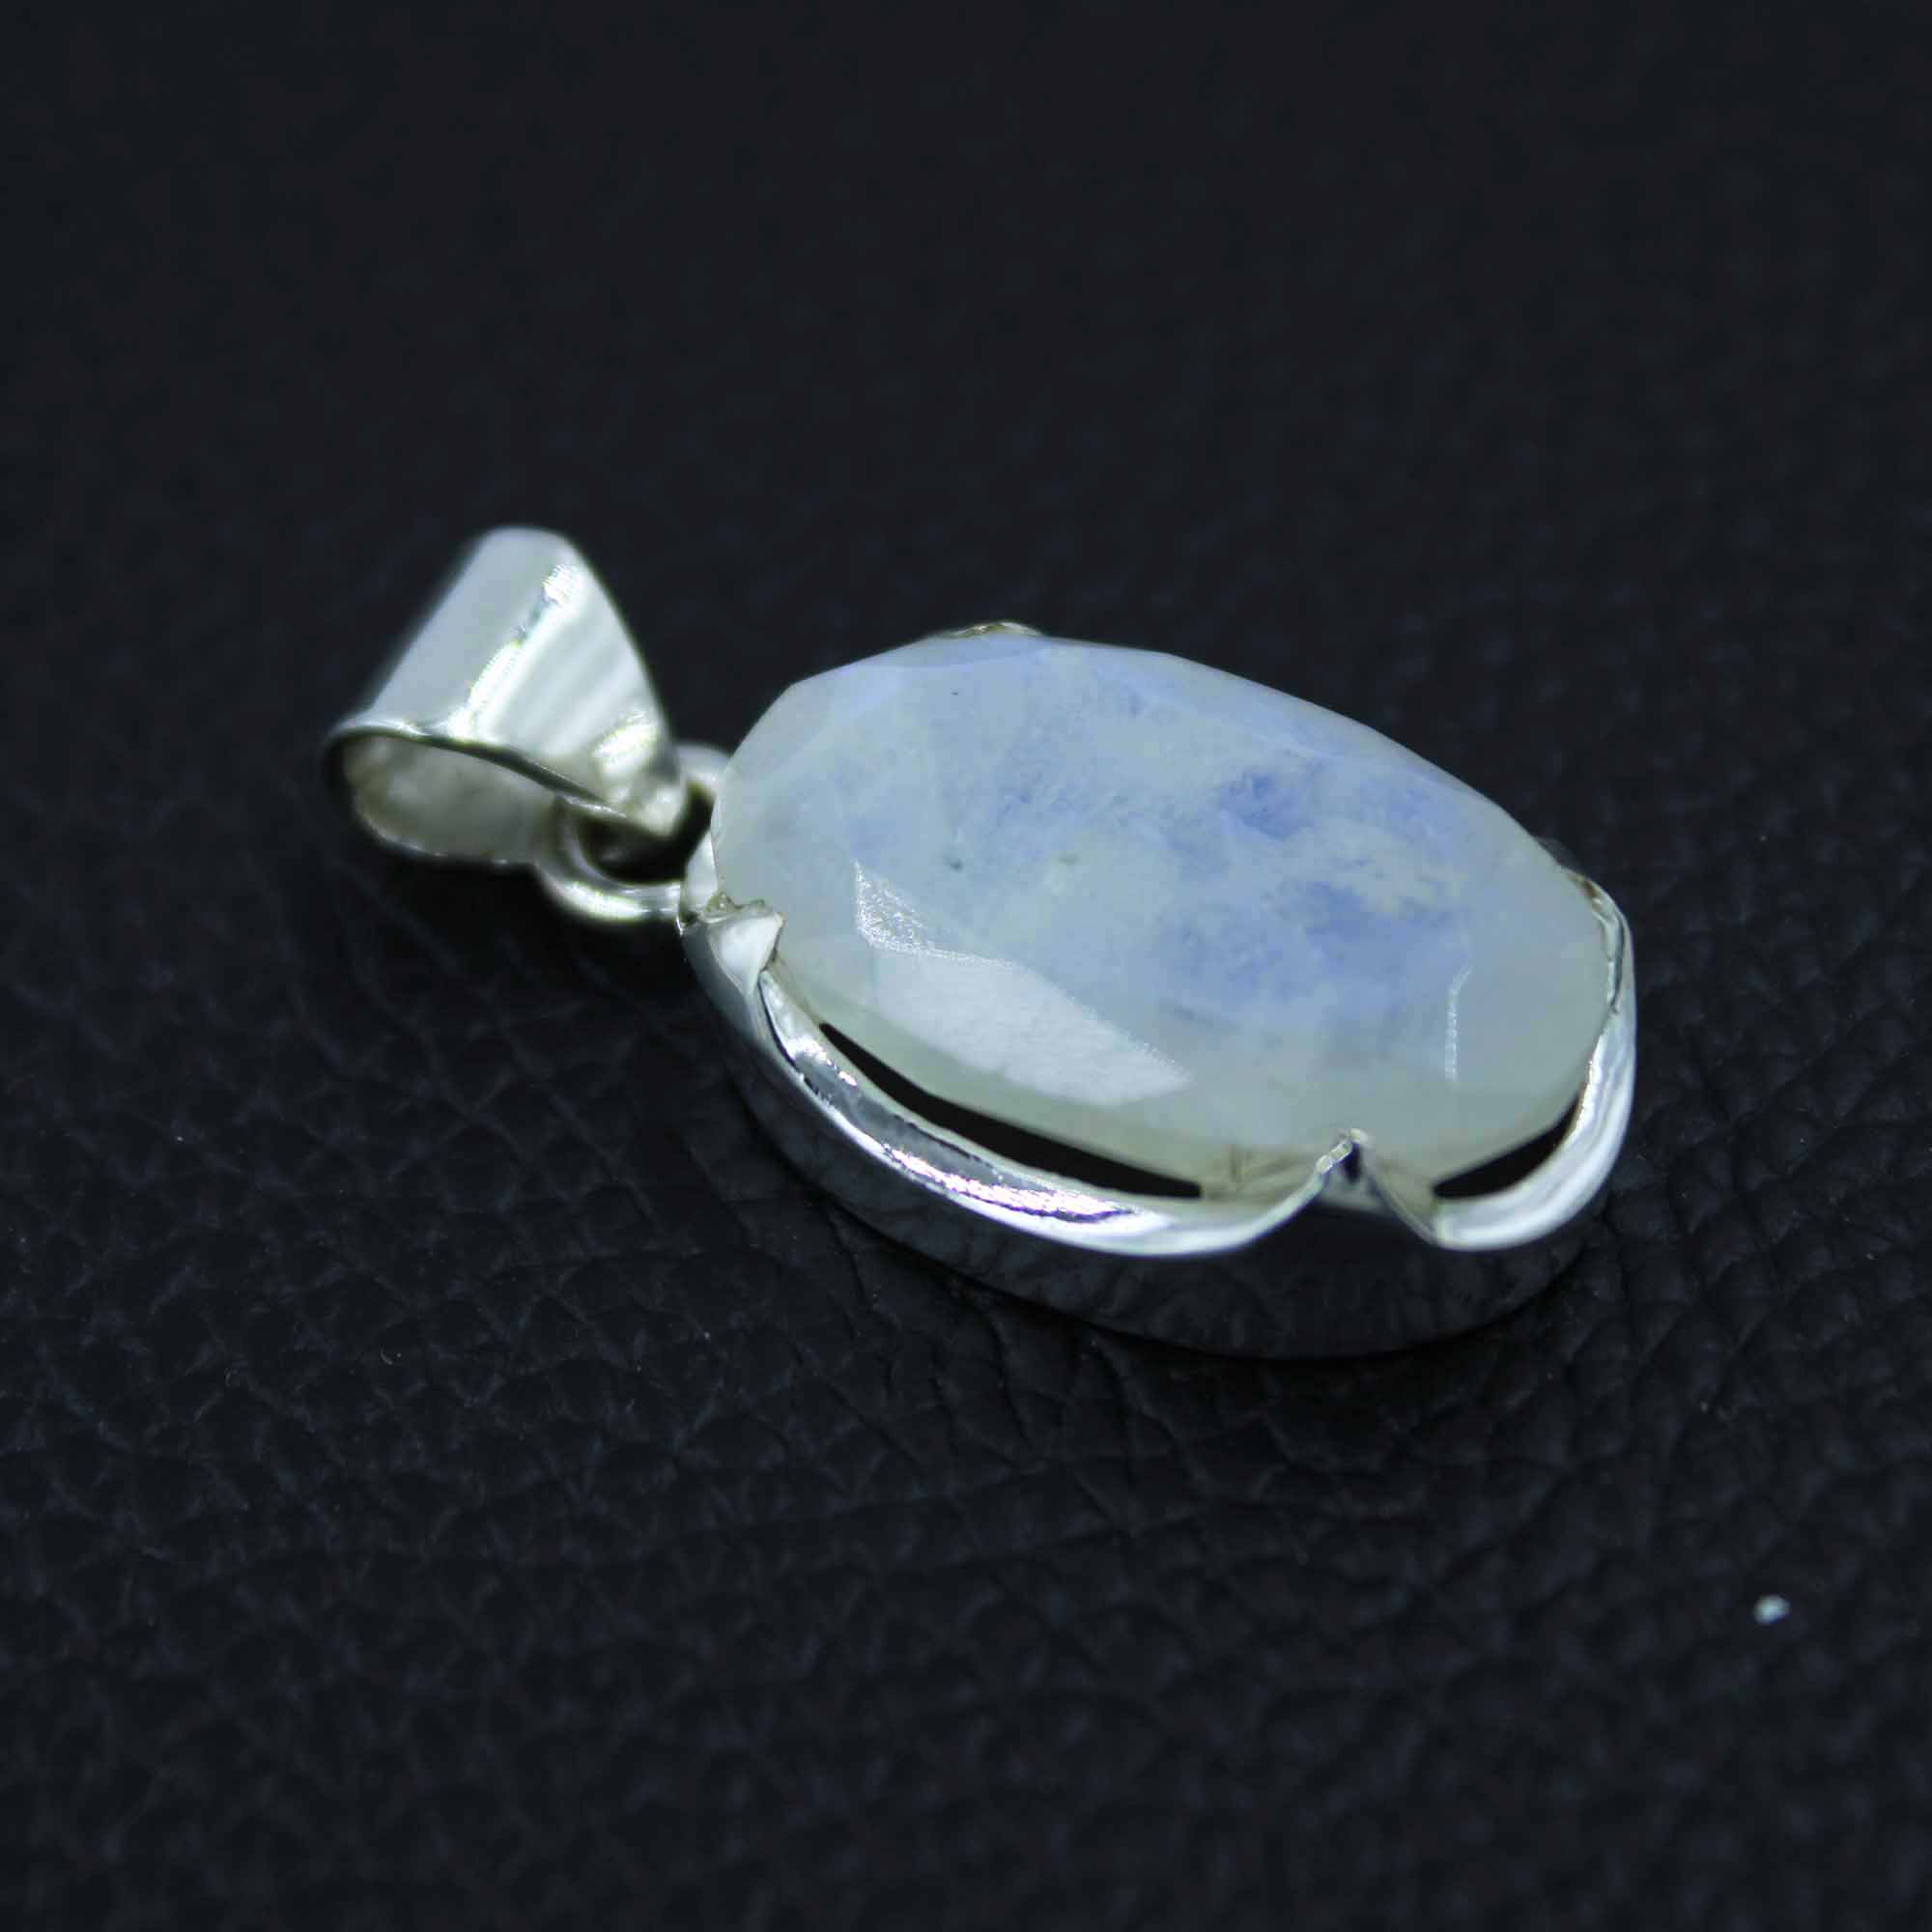 Faceted Moonstone Silver Pendant